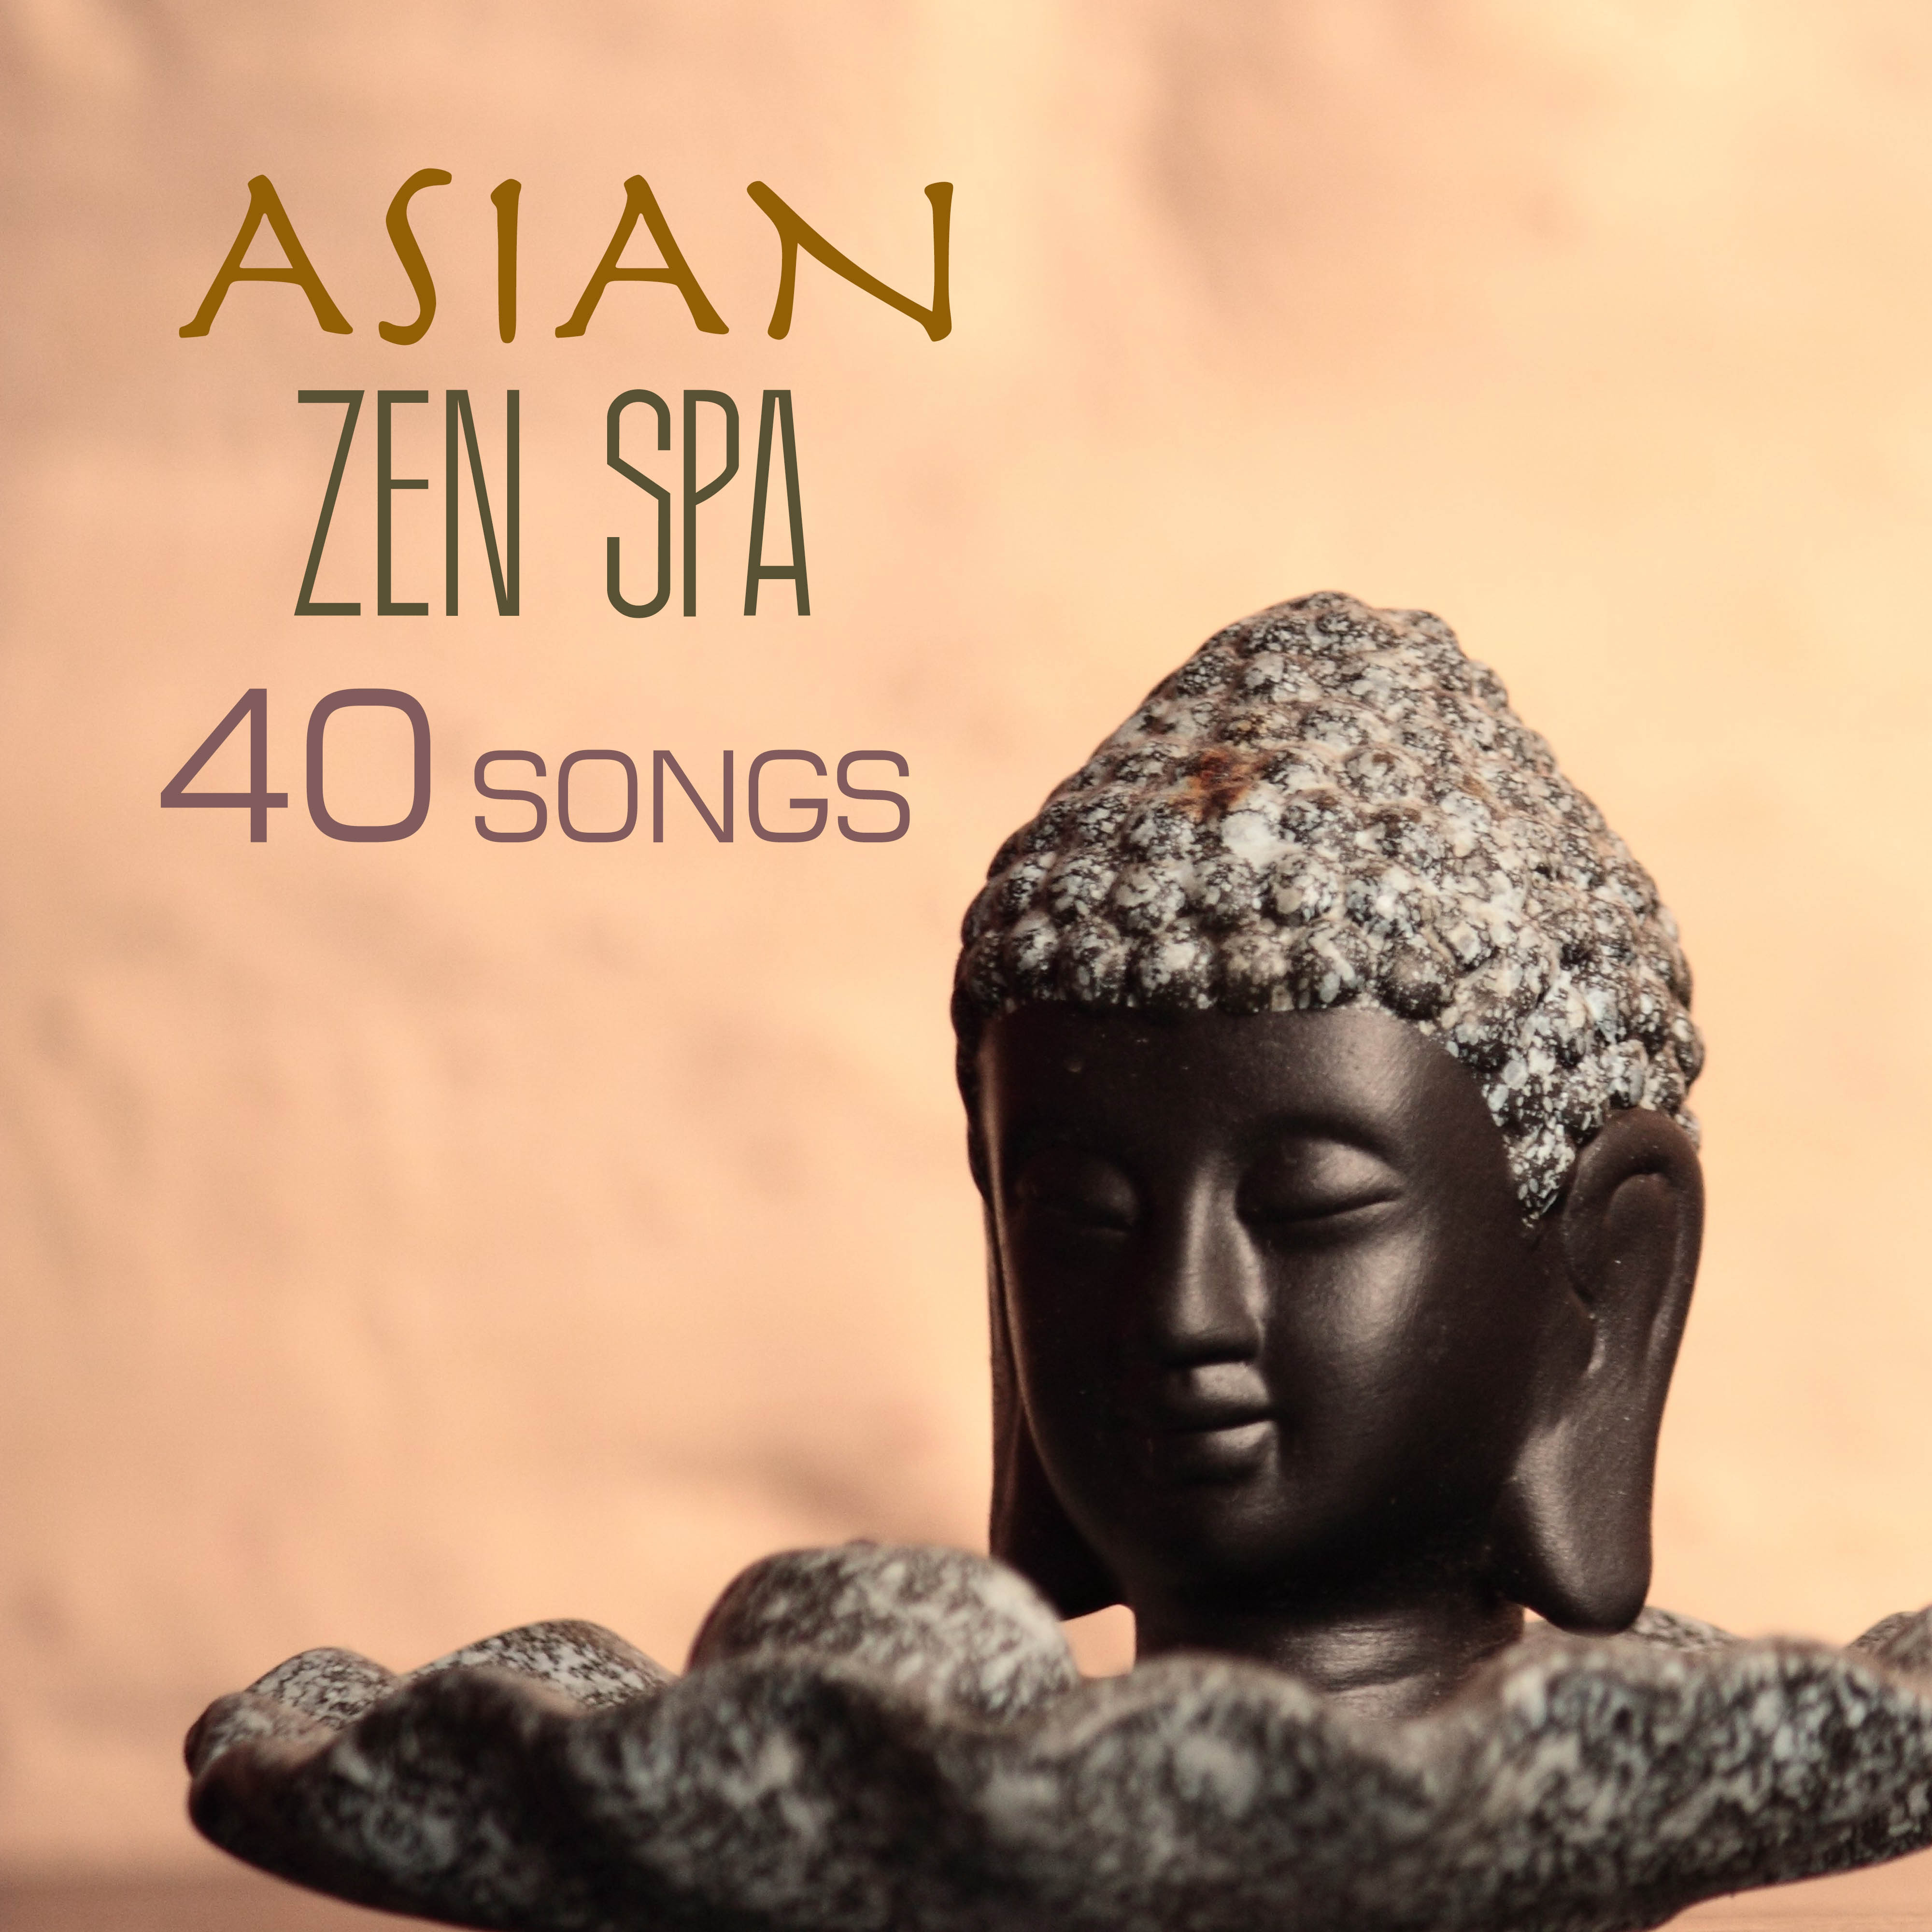 Asian Zen Spa Music - 40 Tracks for Meditation, Massage, Yoga, Sound Therapy, Relaxation Massage and Restful Deep Sleep